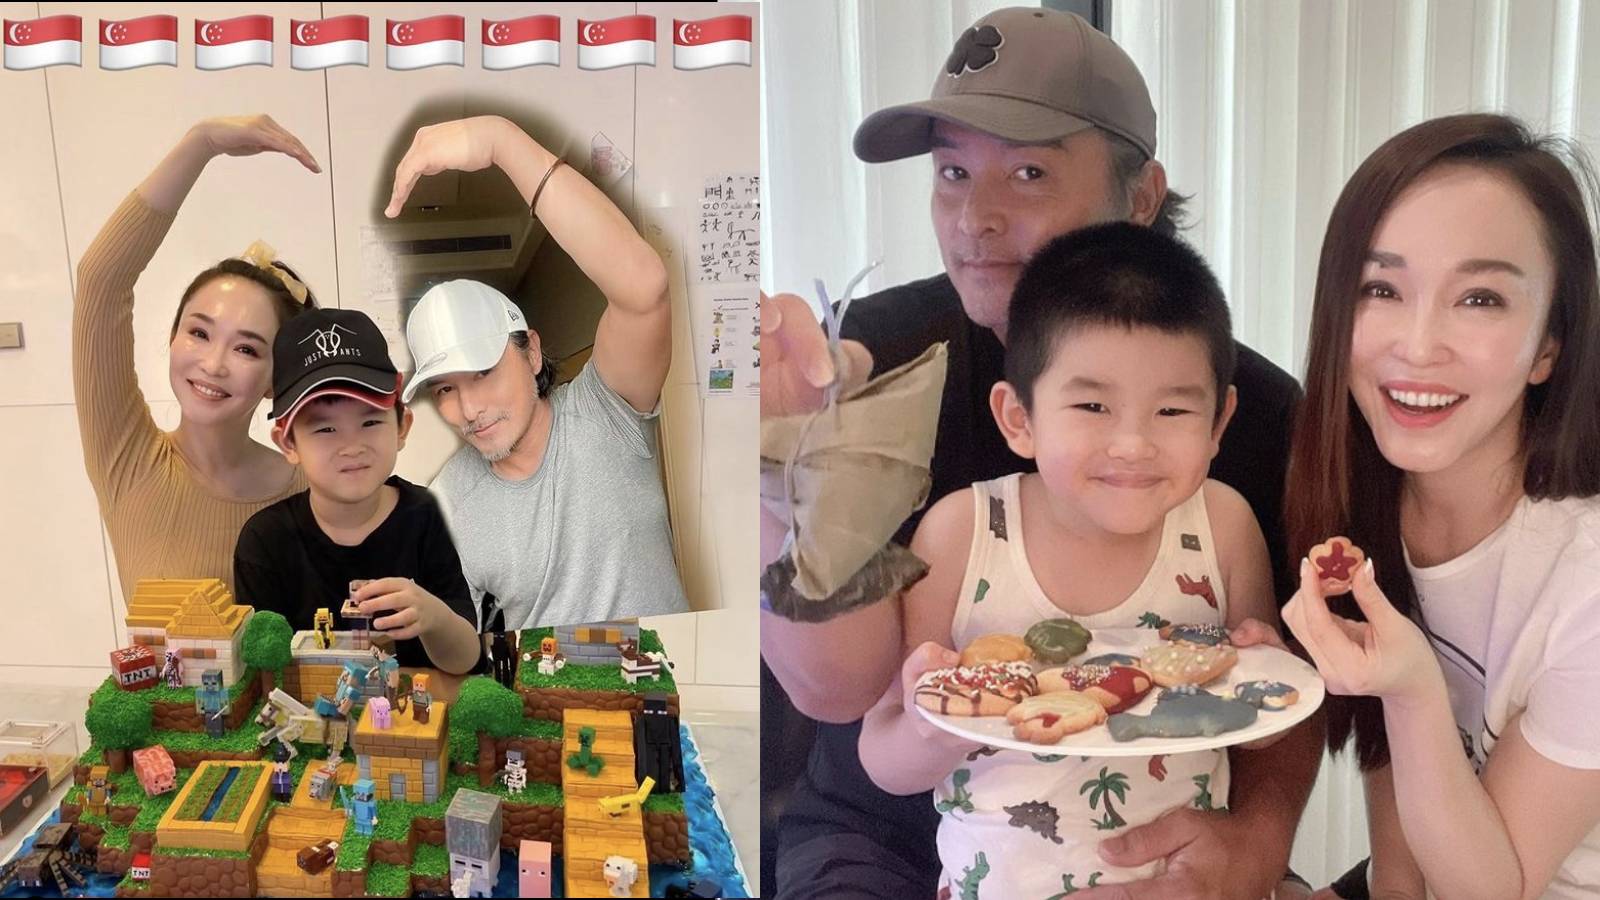 Fann Wong & Christopher Lee’s Son Zed Turned 7 On National Day But Their Family Photo This Year Was A Little Different